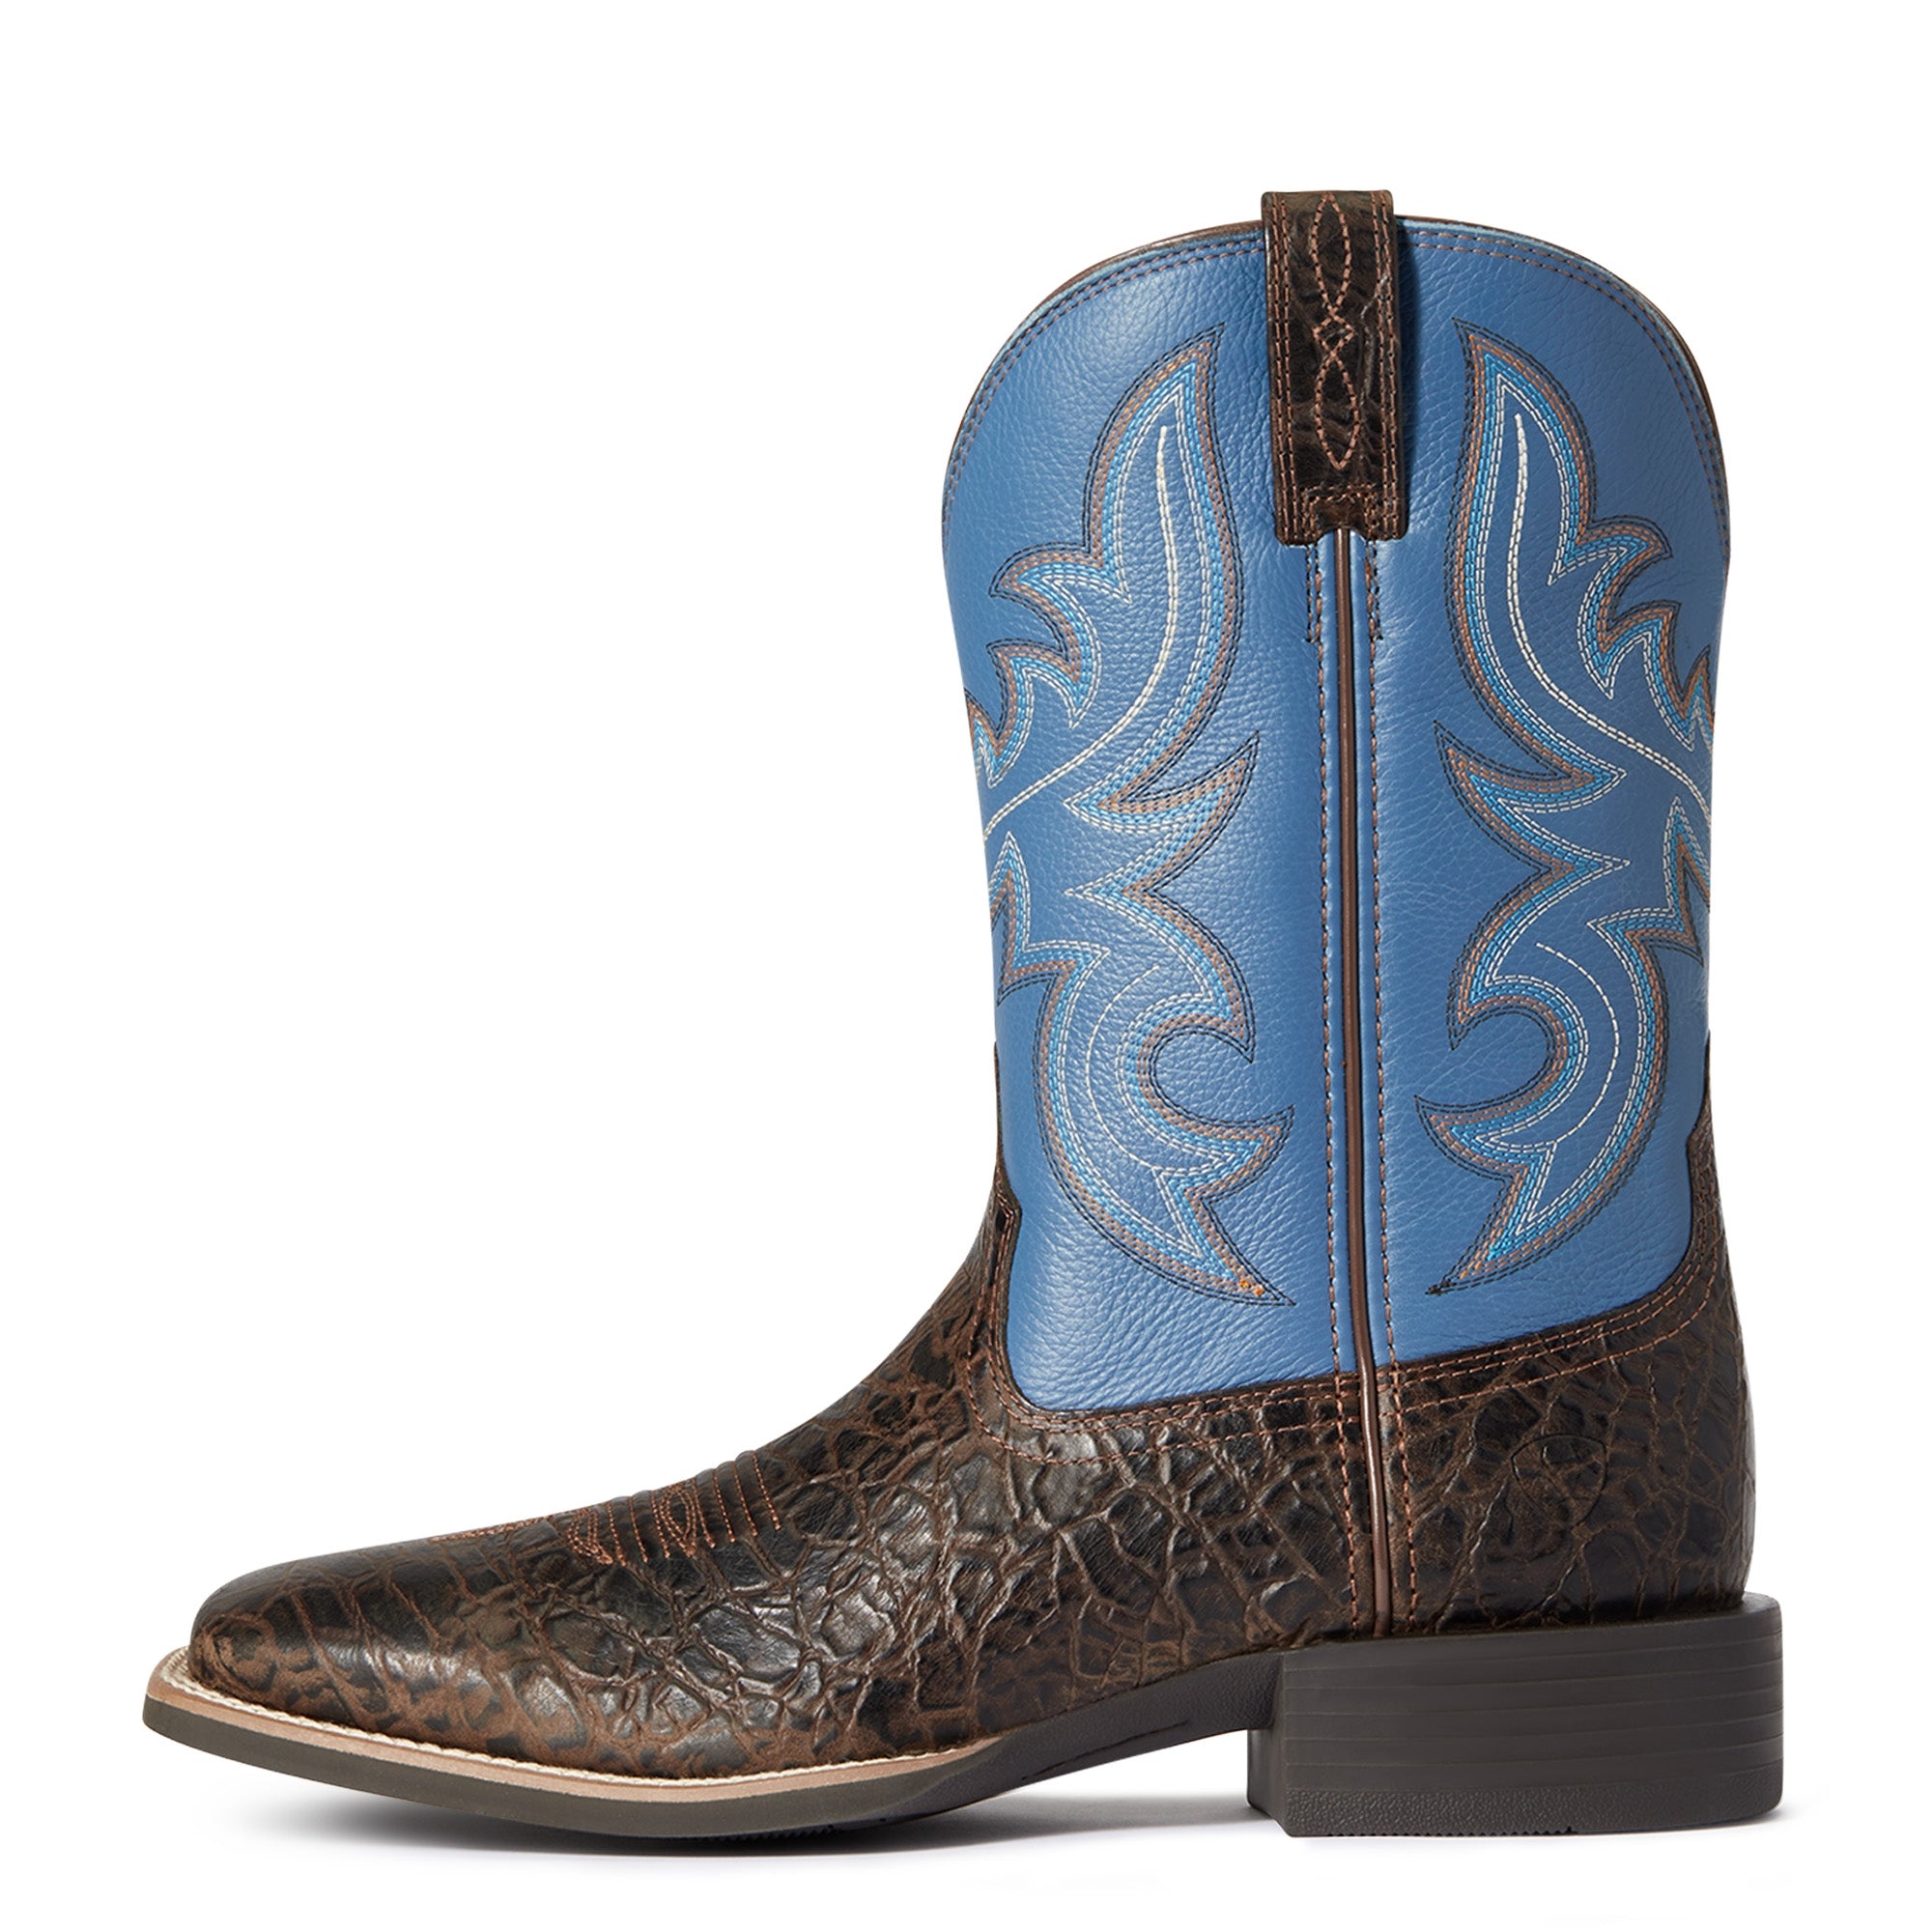 Ariat Men's "Sporty Cow" Western Boots